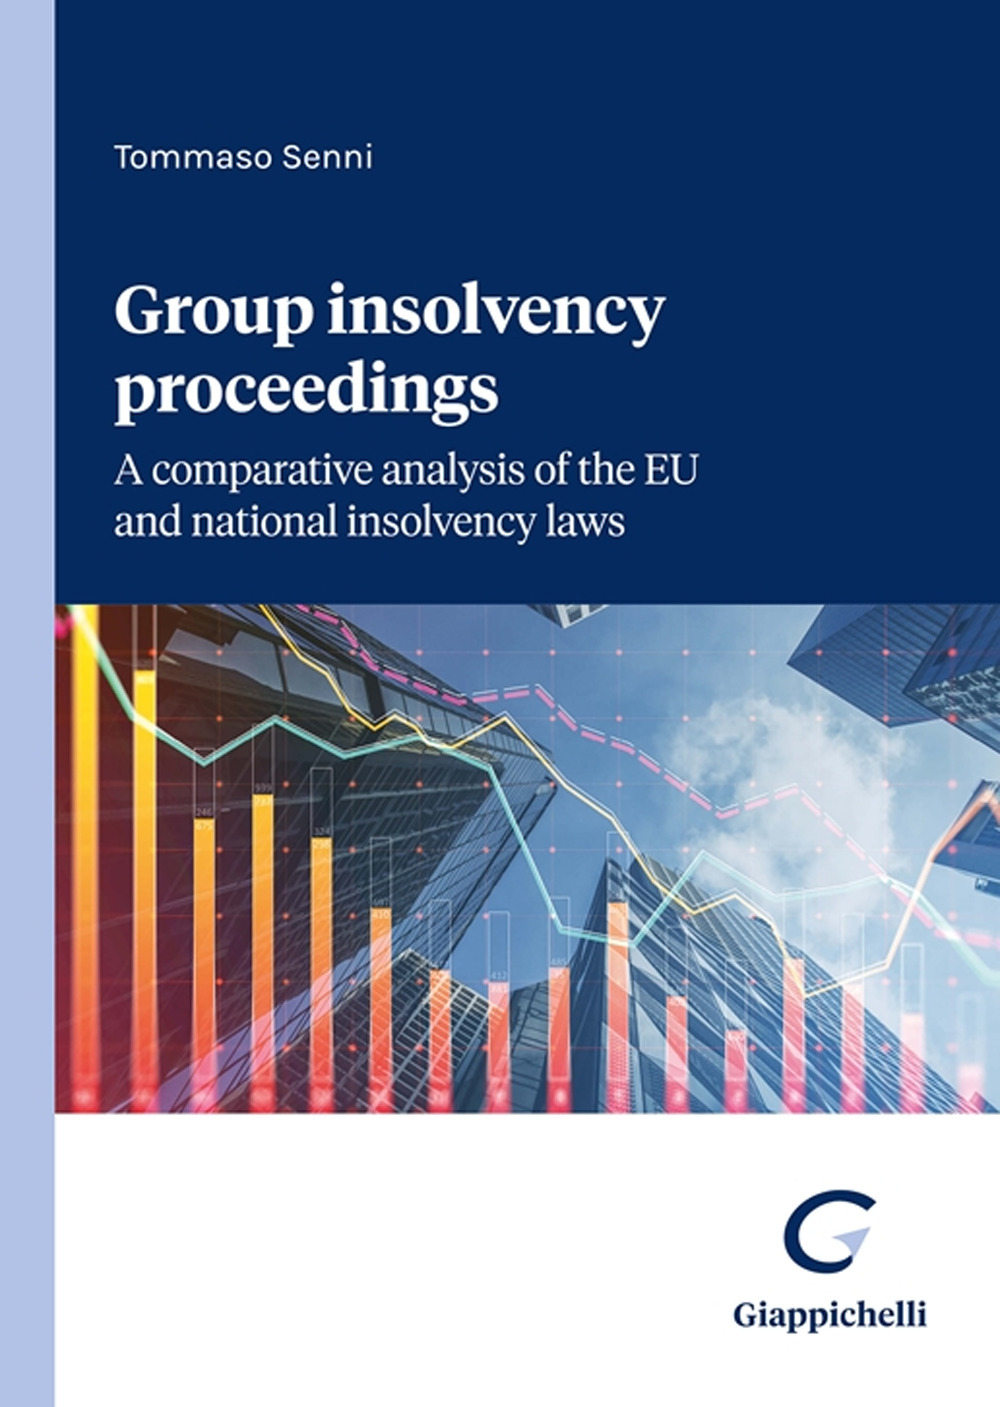 Group insolvency proceedings. A comparative analysis of the EU and national insolvency laws